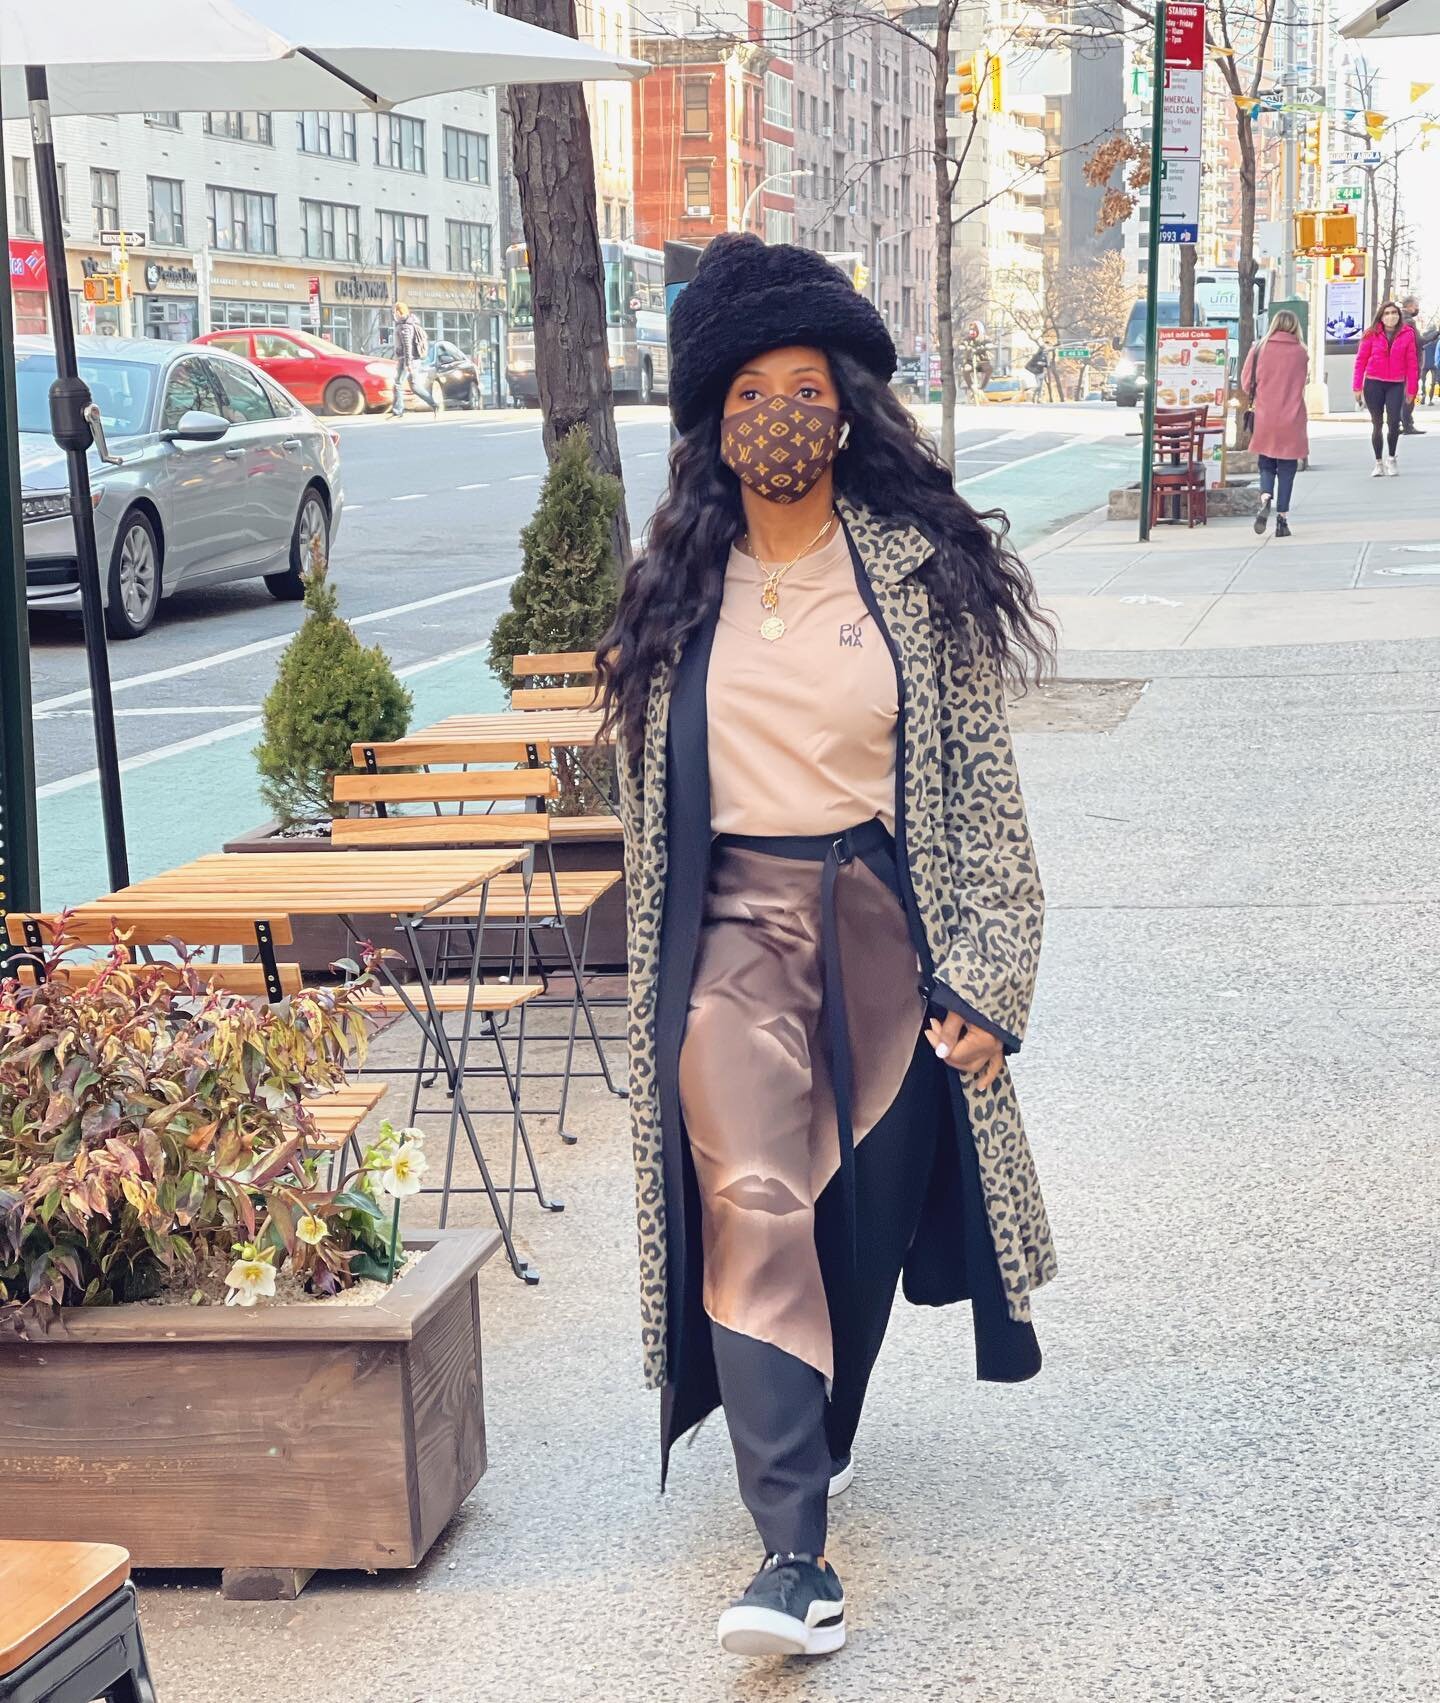 #wowwednesday #stylephile If you love layers, playing with patterns, lounging around in luxury and spicing up your sportswear! 📸 @summerhopechamblin